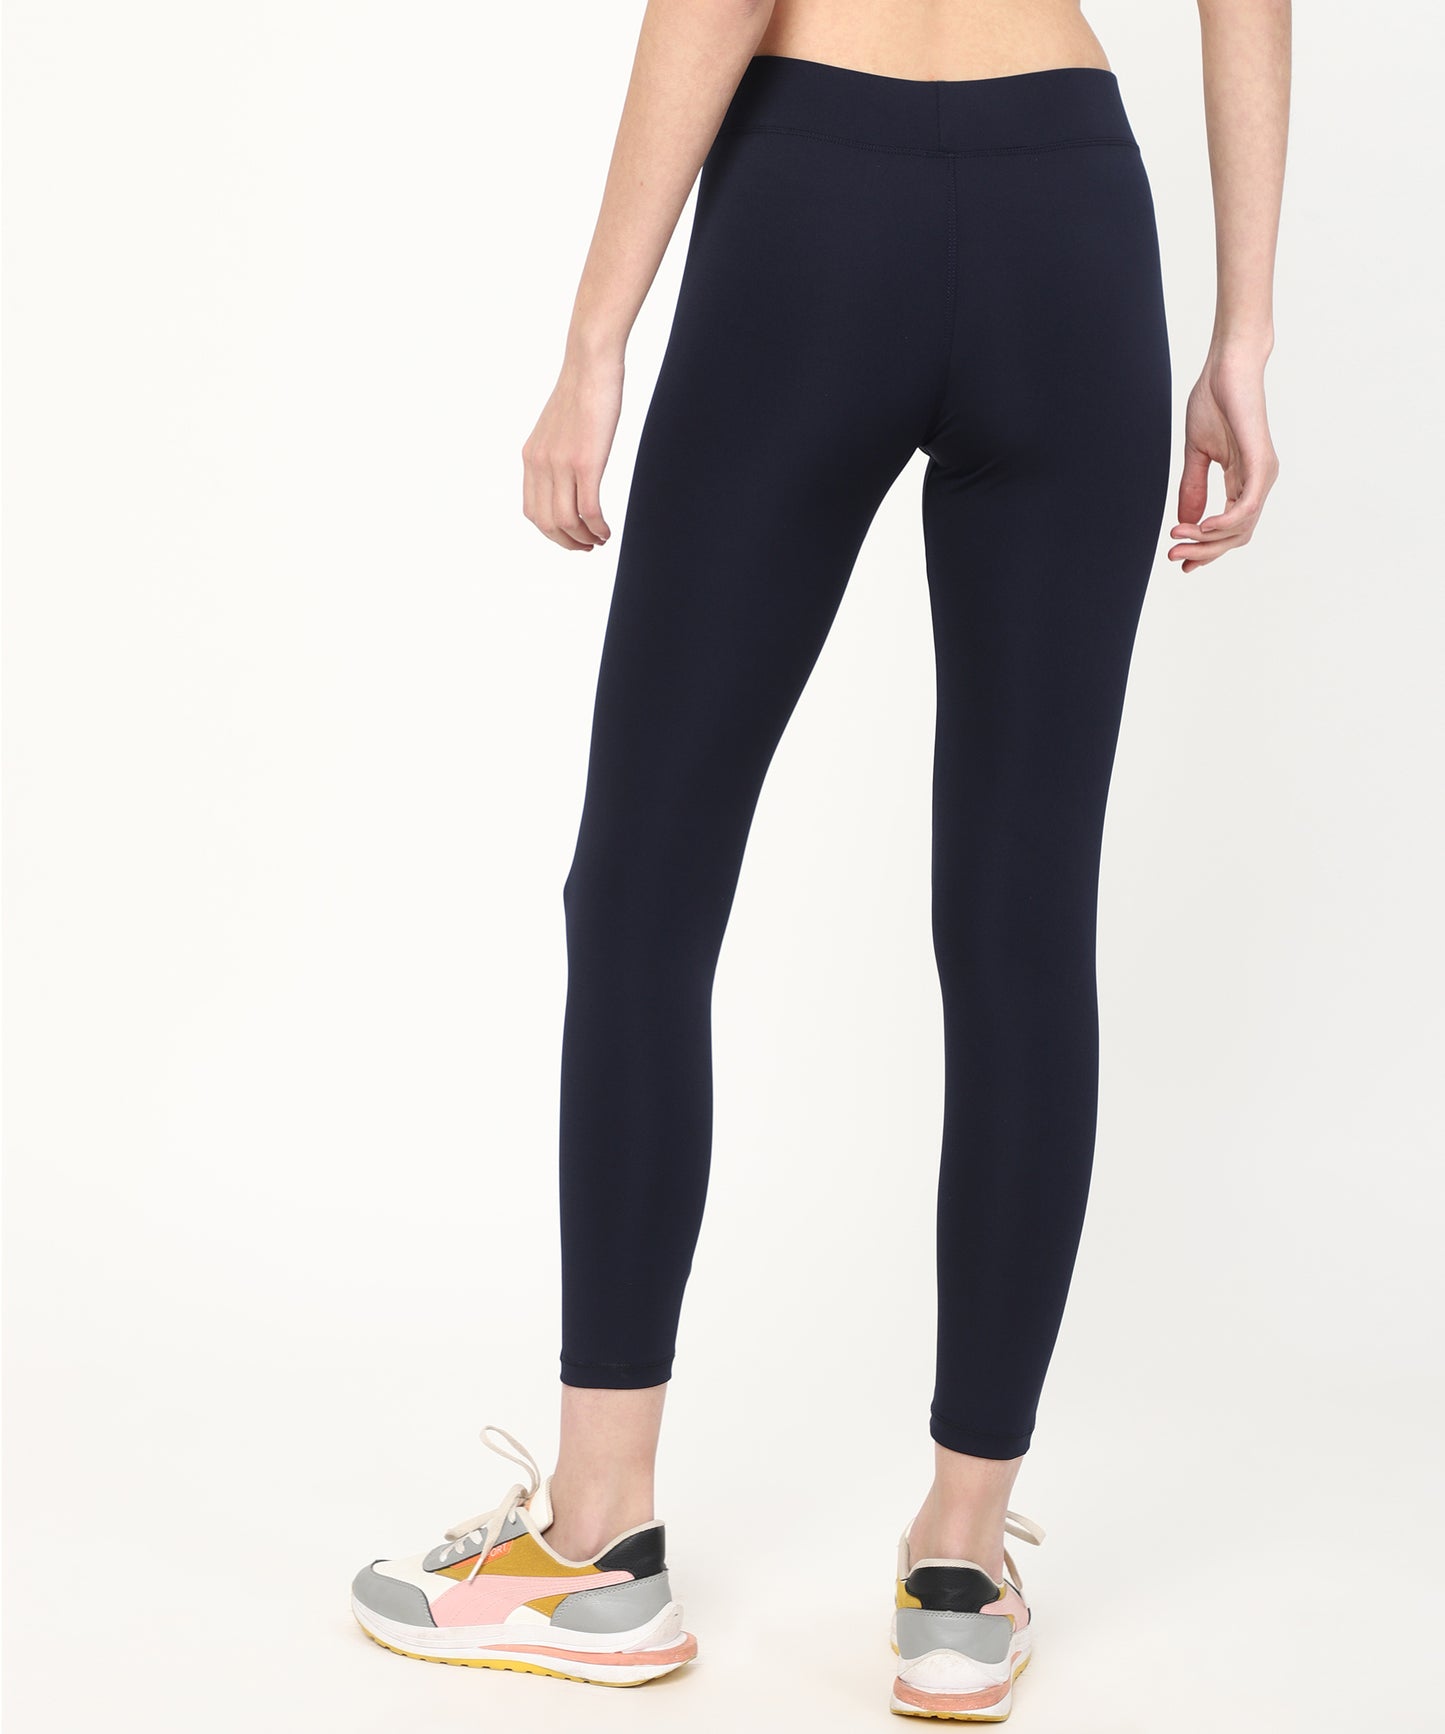 The Ultimate Stretchable Jeggings-Super-High Waisted Elastic Jeggings Yogapants Ankle Length(Blue)